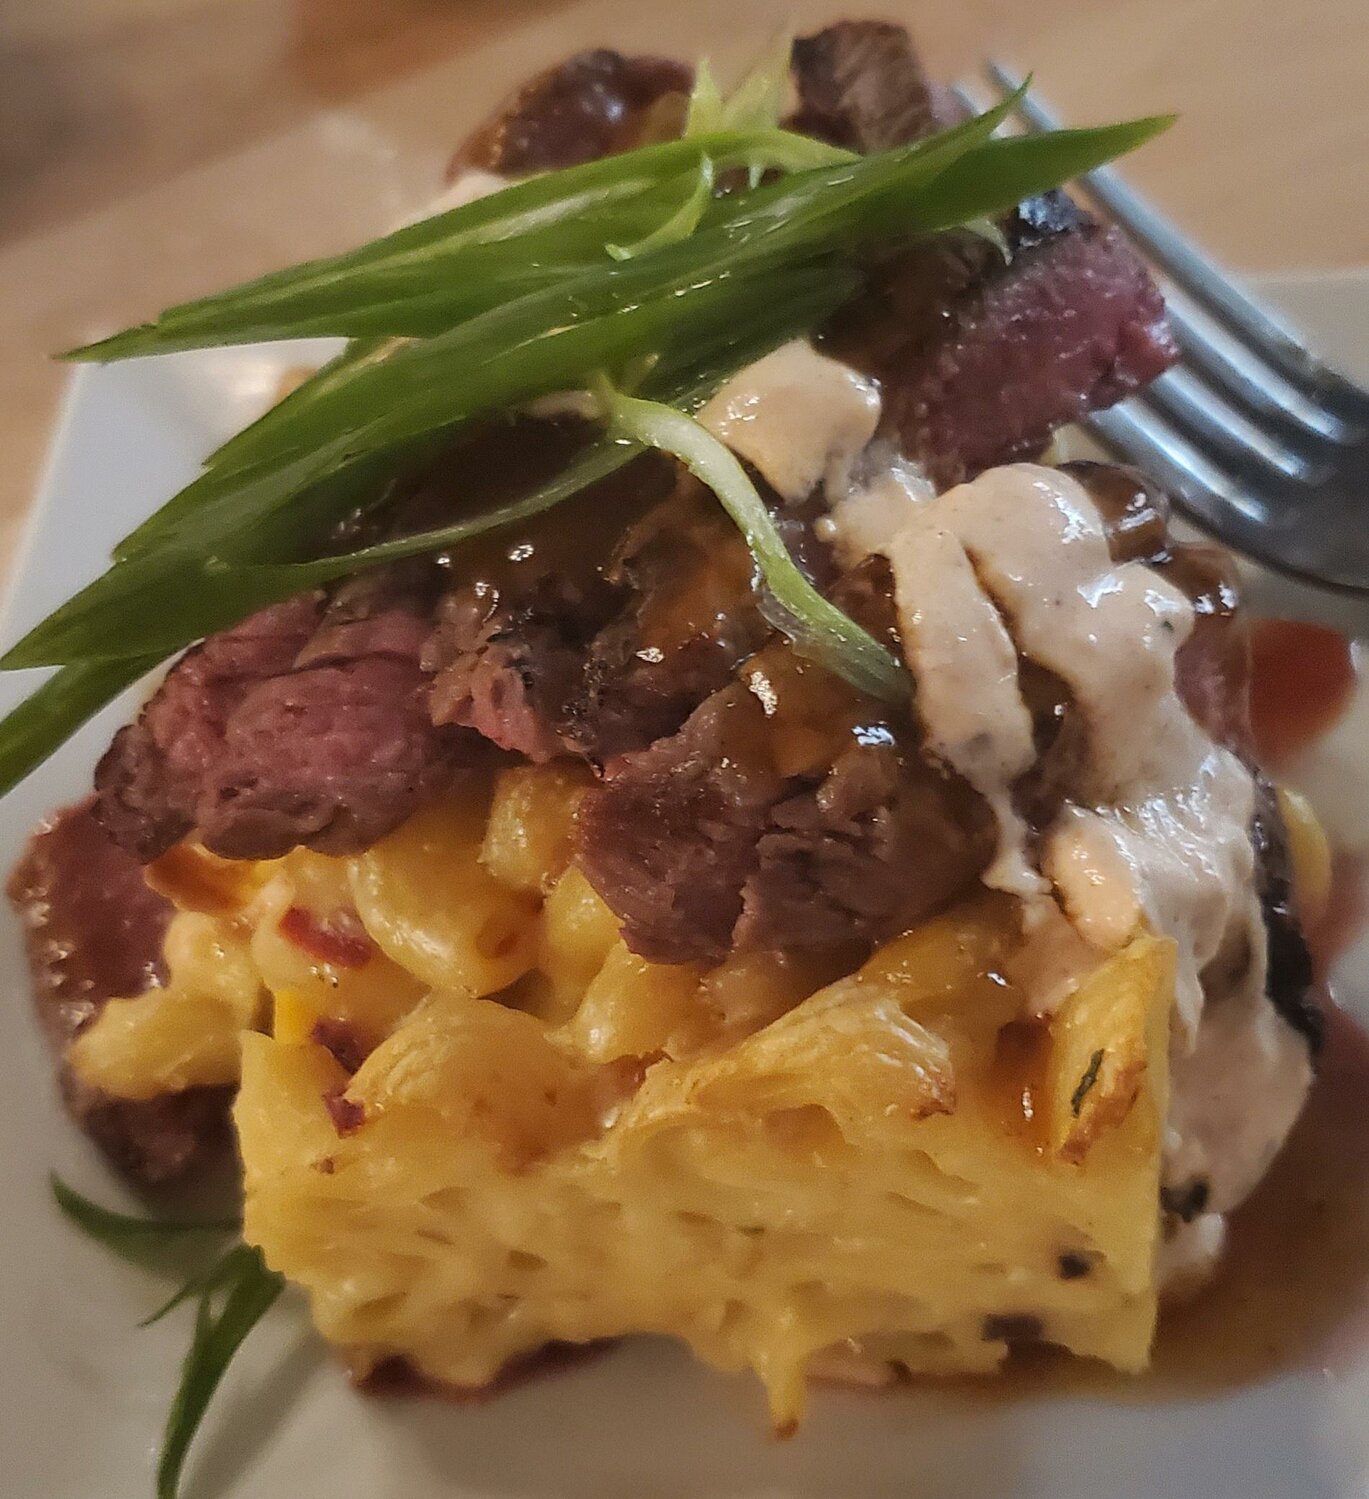 Ribeye Mac N Cheese — Baked cavatappi, smoked cheeses, red chili datil glaze, Spanish crème, charbroiled ribeye with bacon and peppers